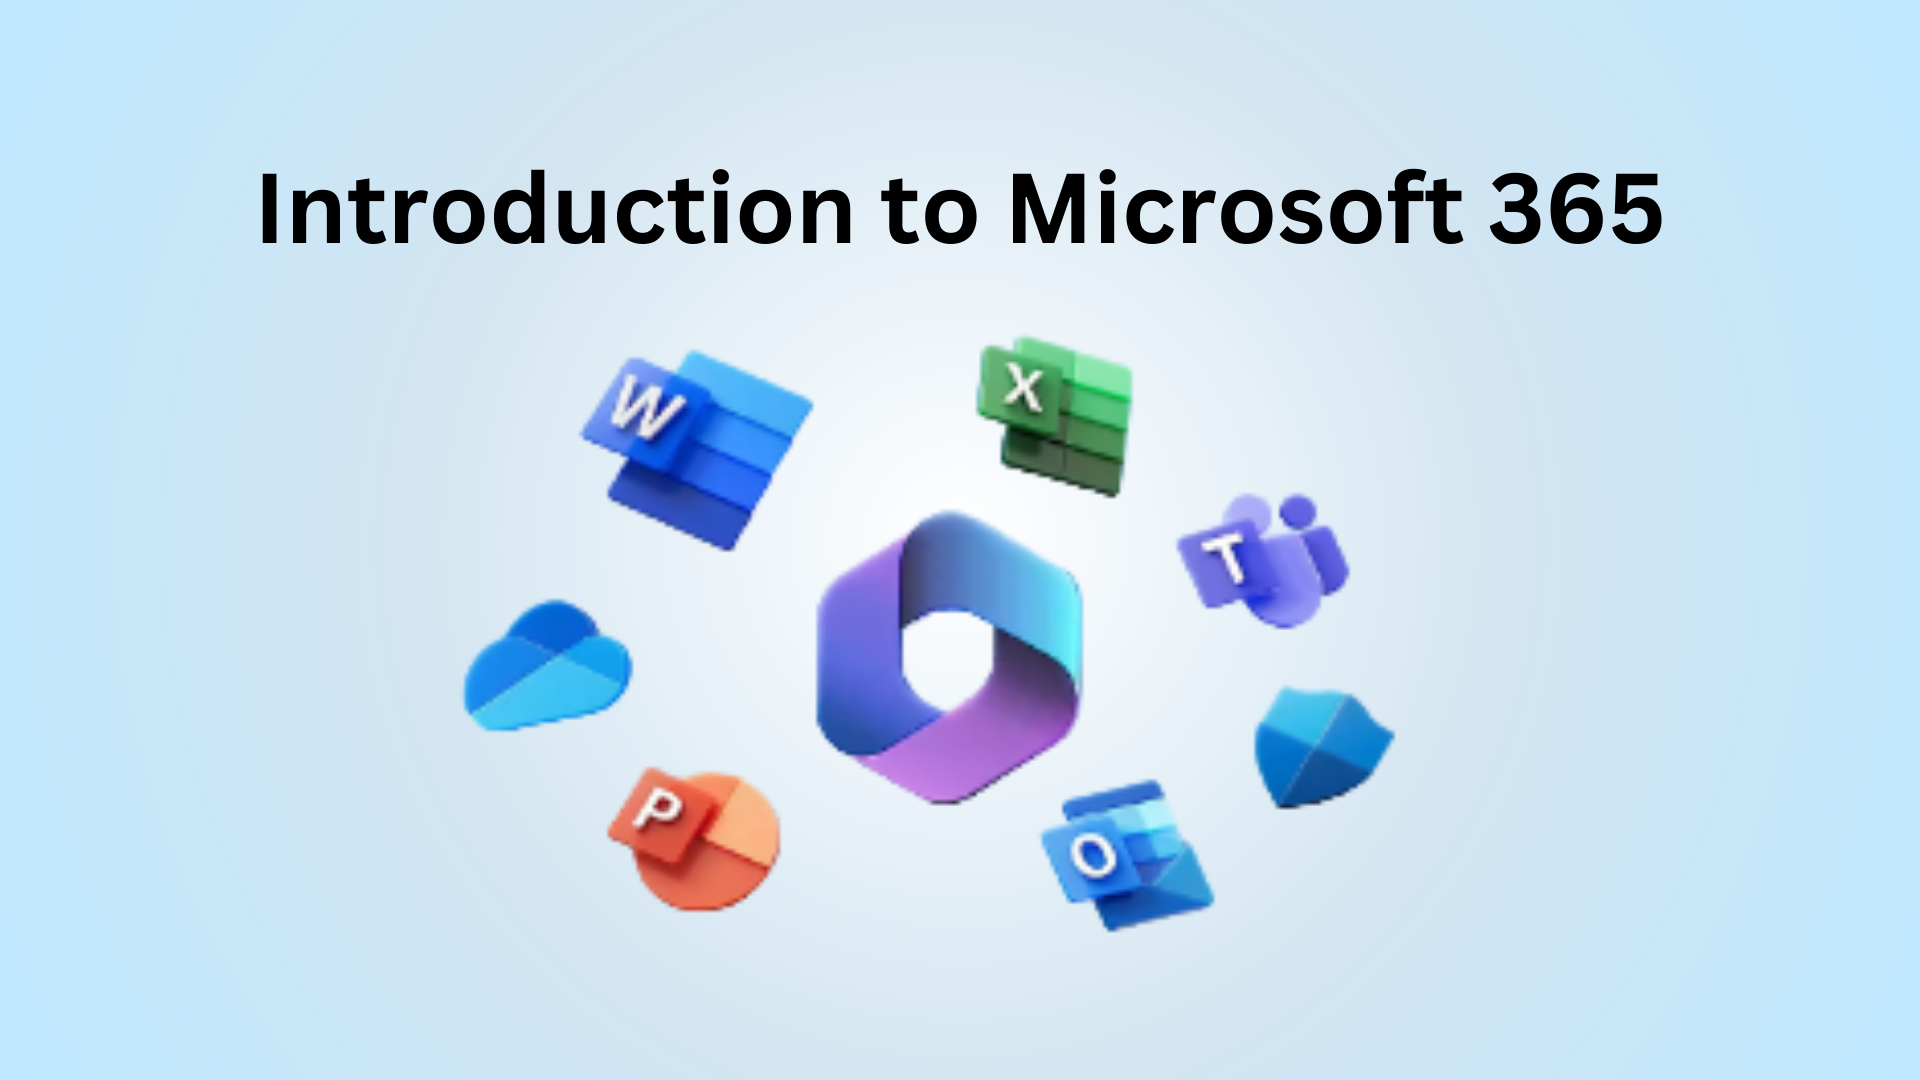 Introduction to Microsoft 365